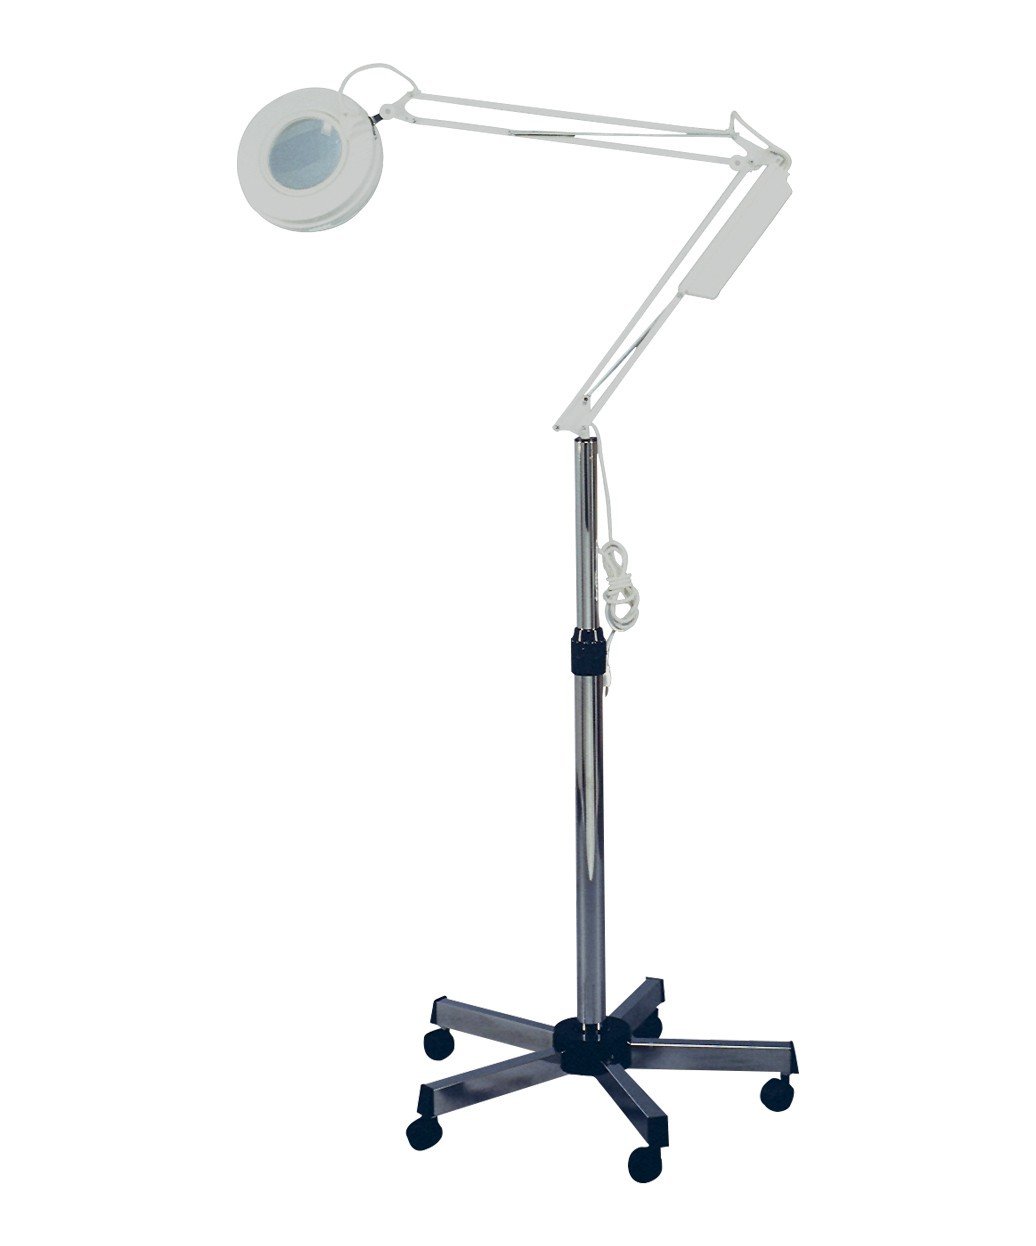 Pibbs 2010 Magnifying Lamp On Casters, Magnifying Lamp With Caster Base